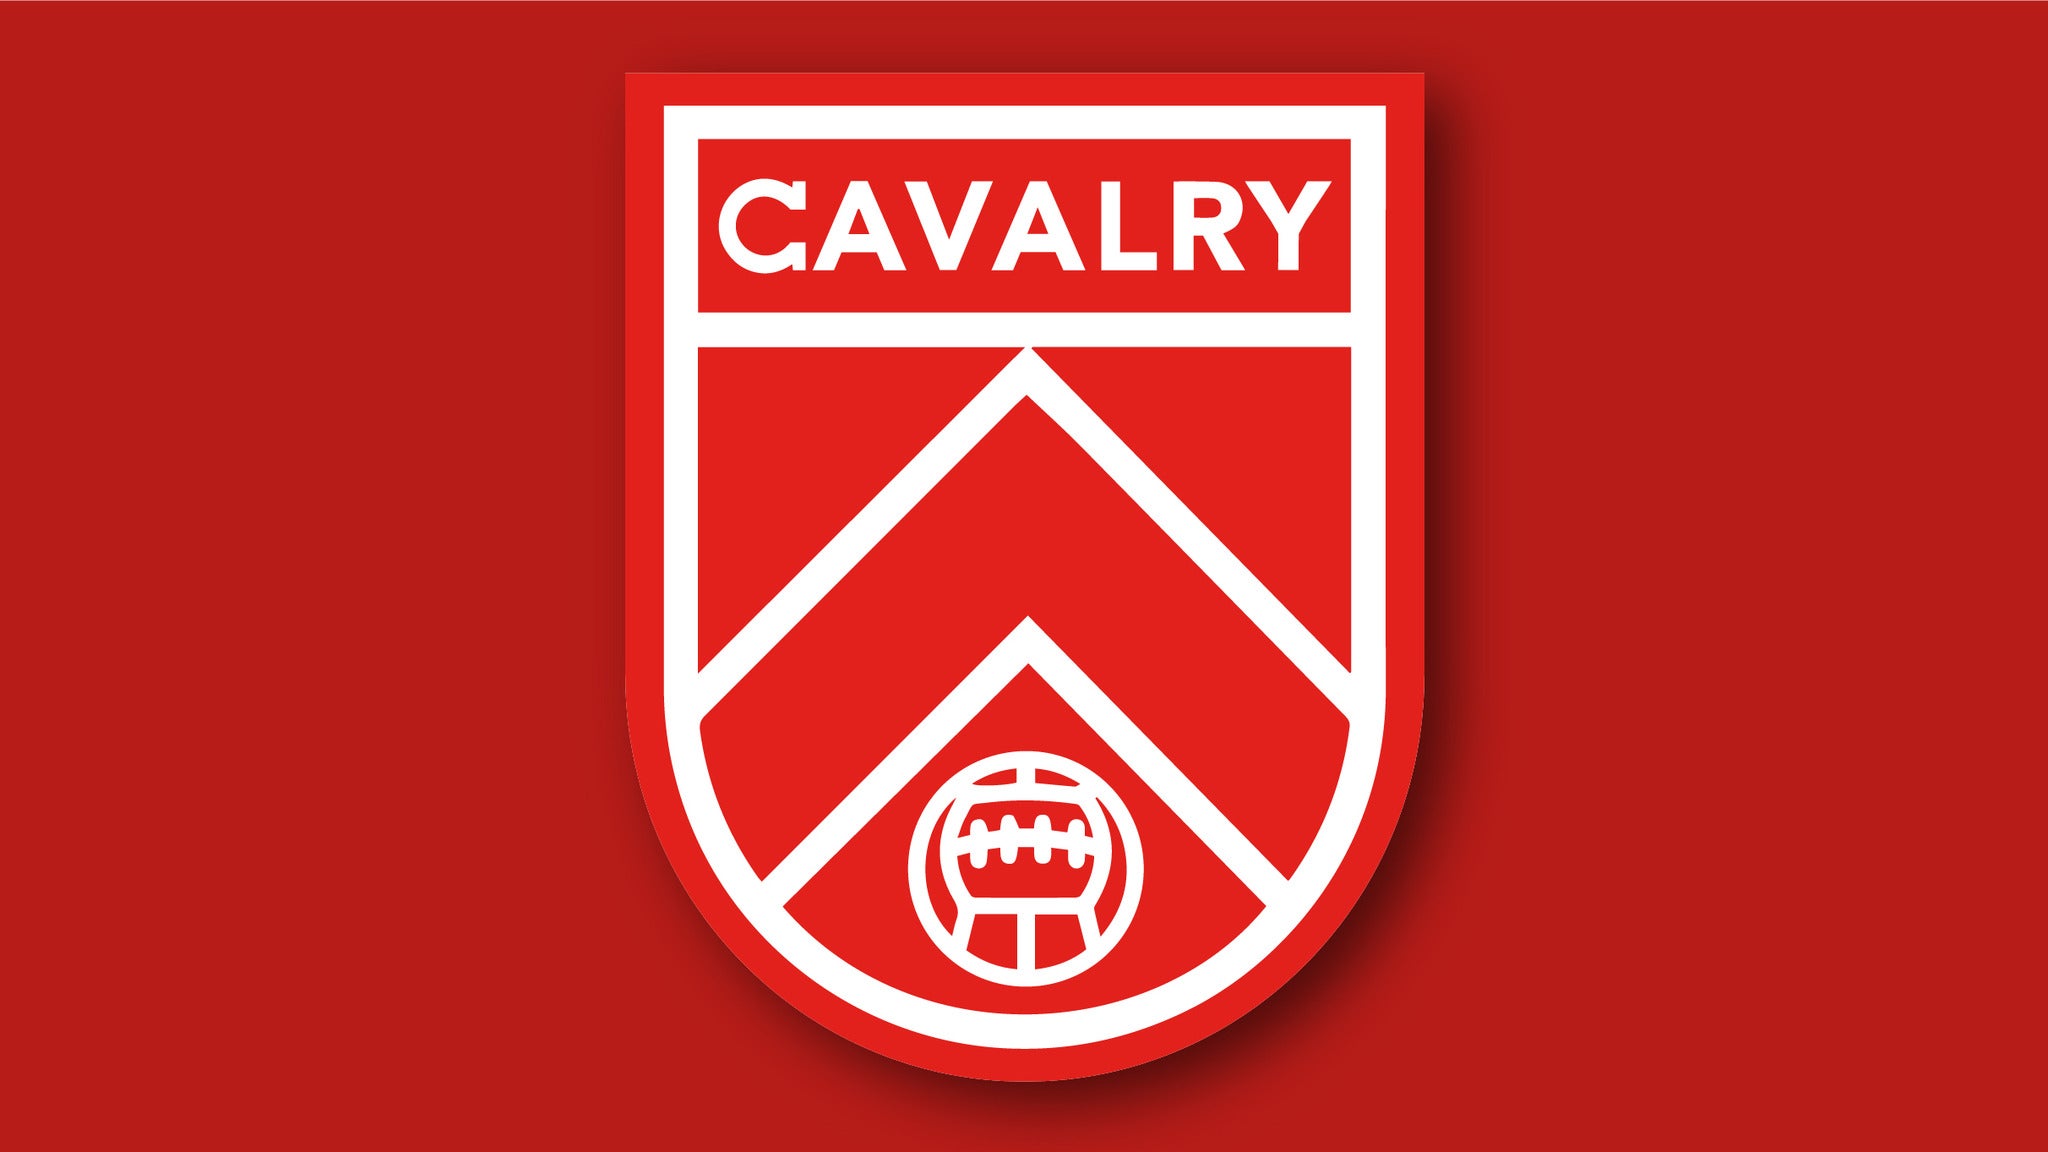 Cavalry FC vs. HFX Wanderers FC in Calgary promo photo for Special  presale offer code